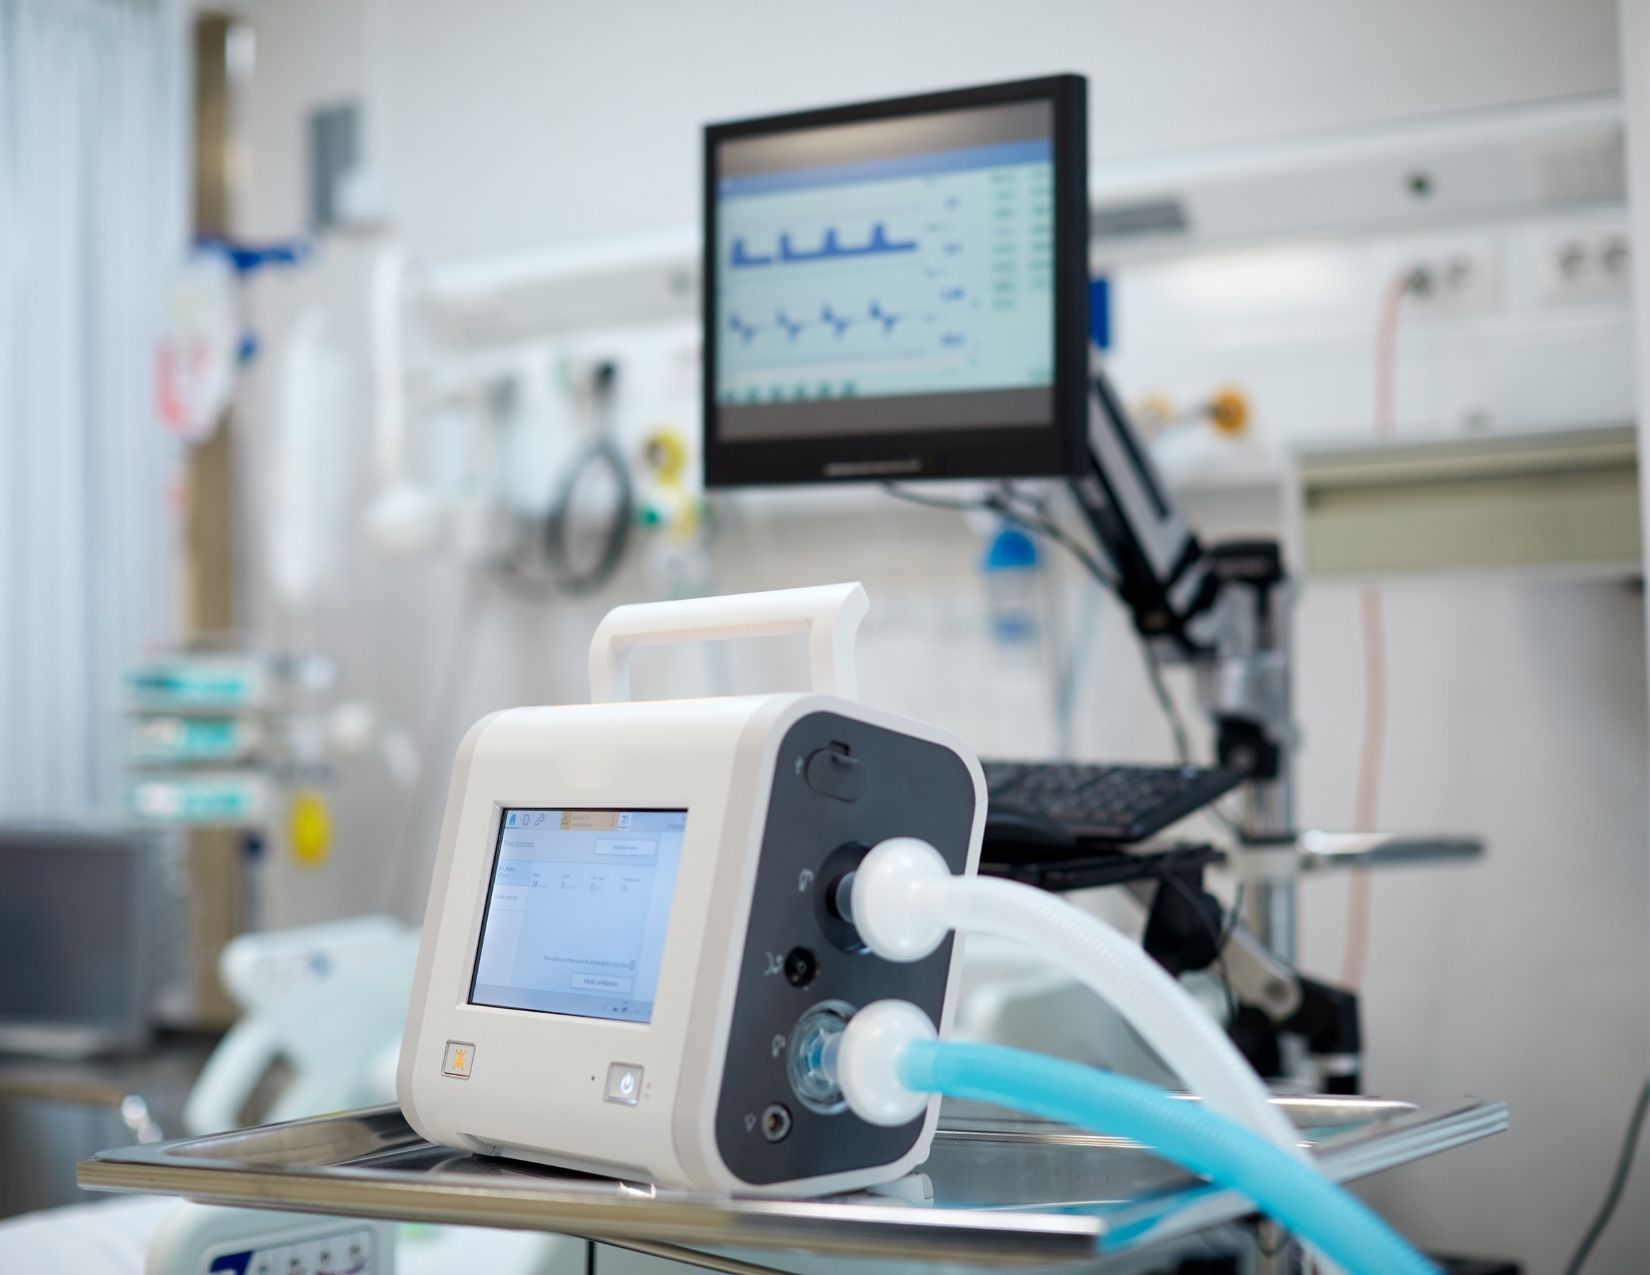 What Is Causing a Decrease in the Global Ventilator Market?